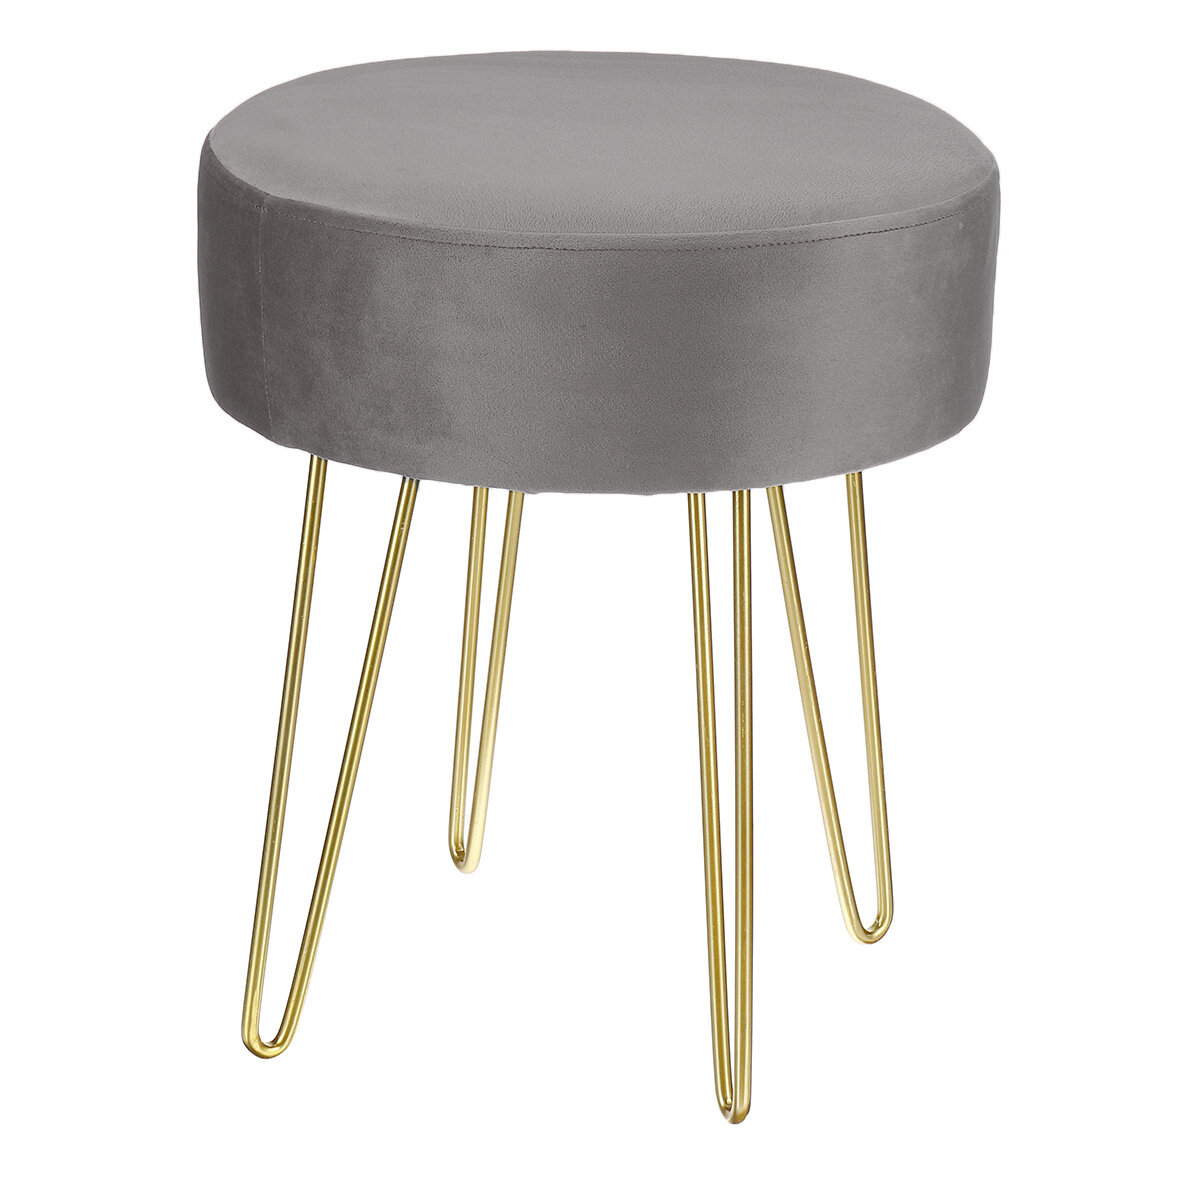 

Round Dressing Table Stool Soft Velvet Piano Chair Makeup Seat Wire Legs Home Bedroom Creative Low Stool